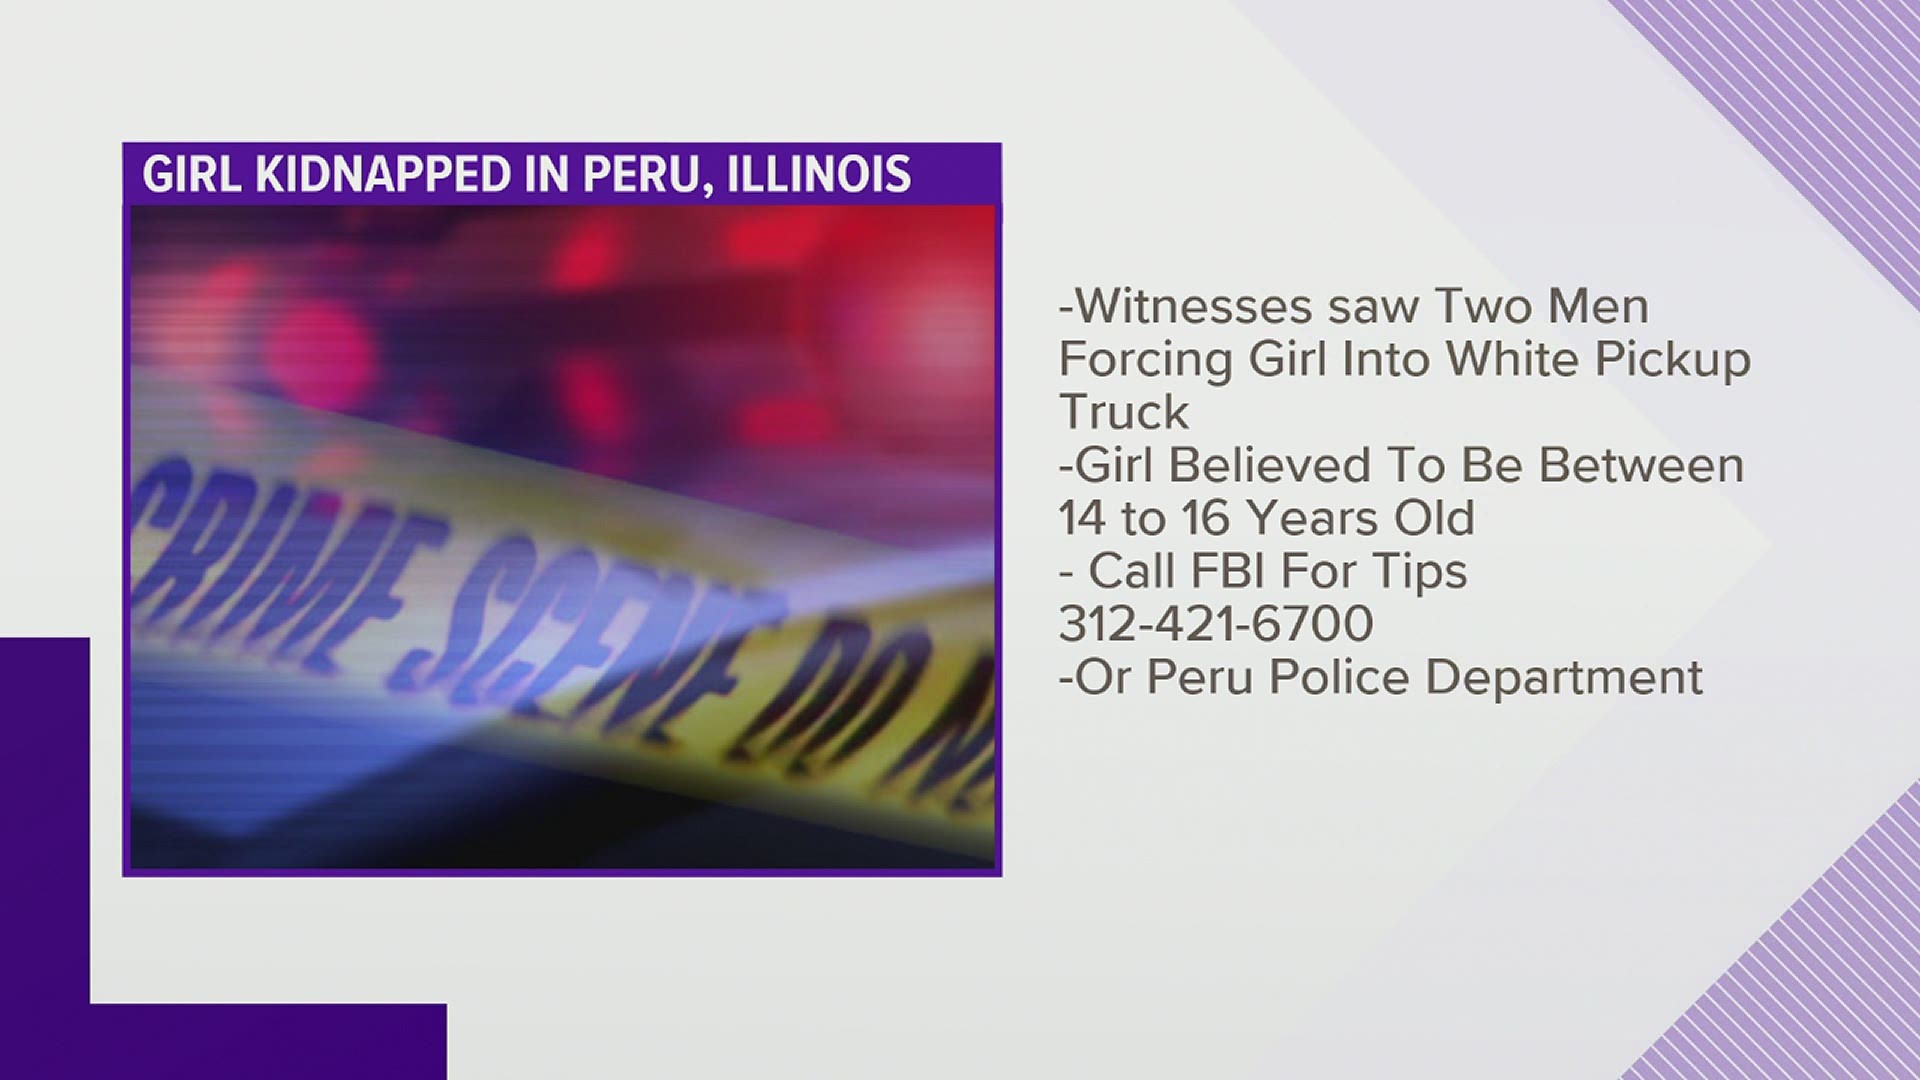 Multiple witnesses saw two men forcing the girl into a car early Monday morning.